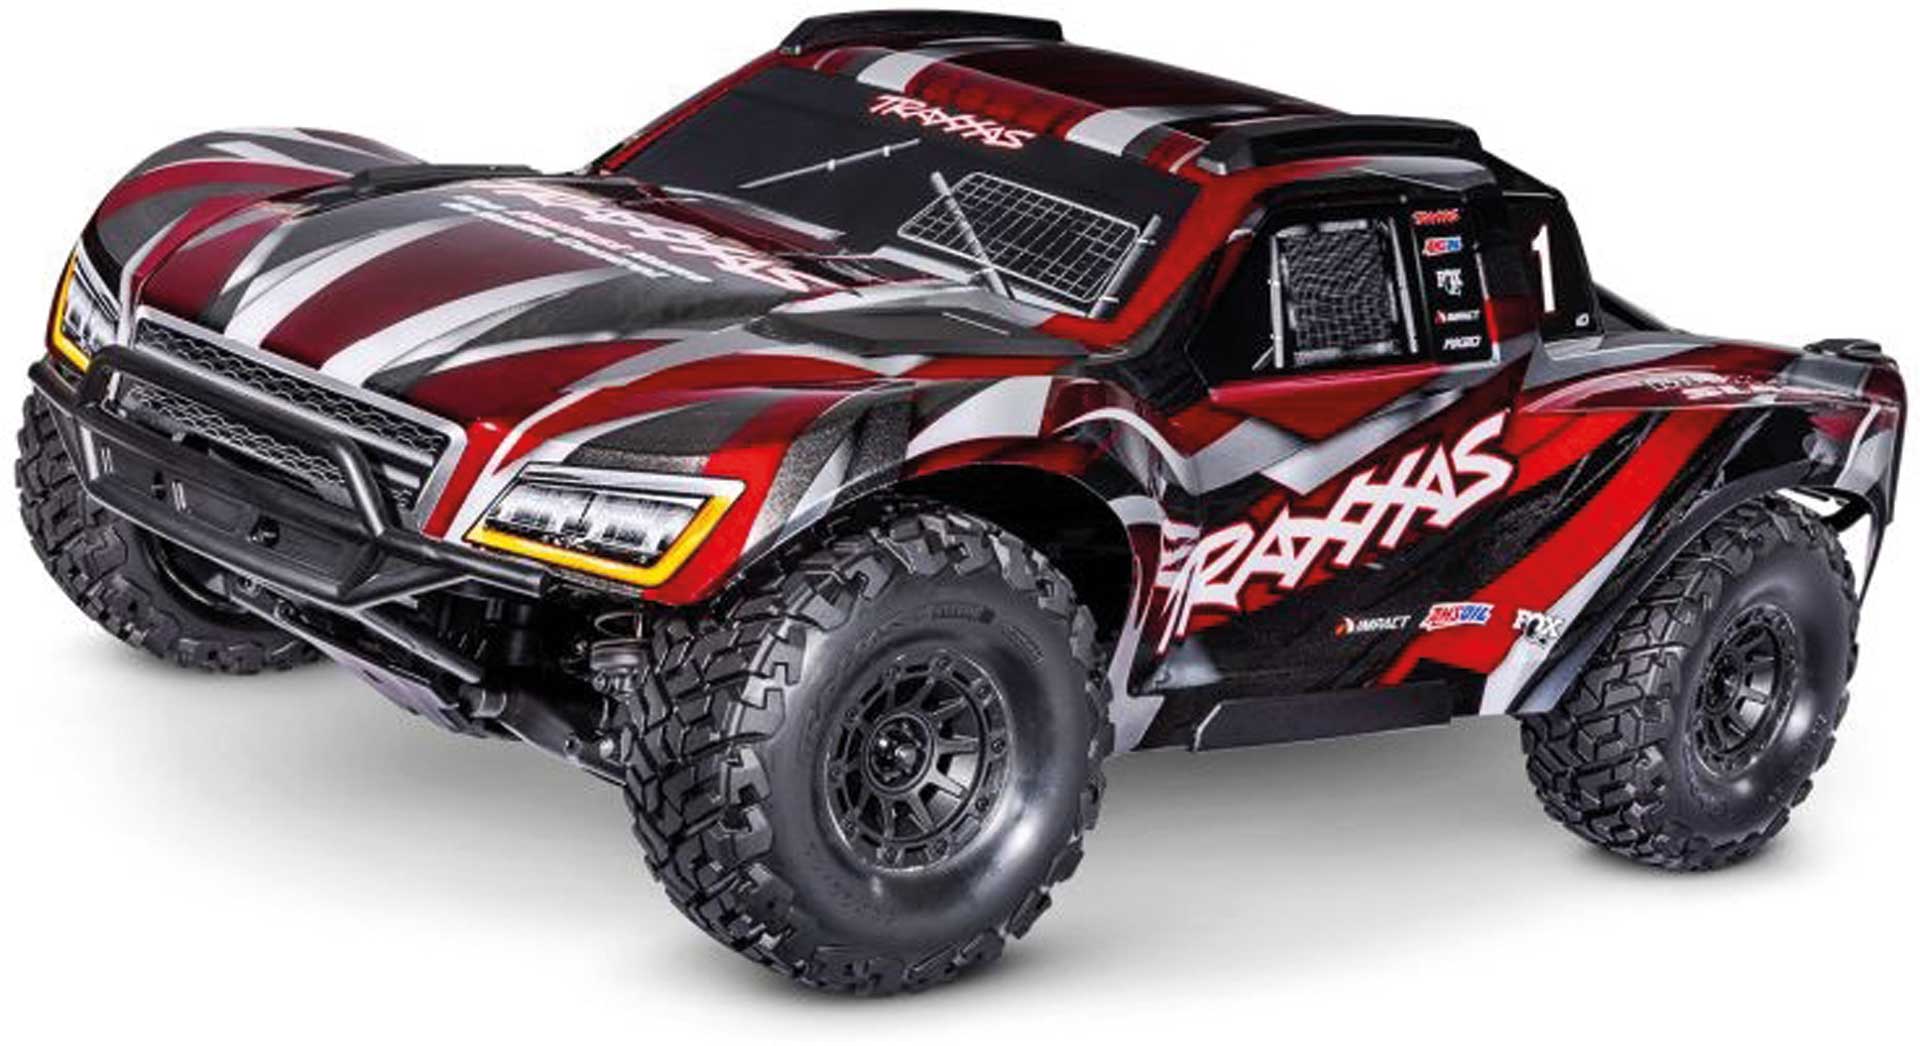 TRAXXAS MAXX-SLASH 6S 4X4 RED 1/8 SHORT-COURSE-TRUCK RTR BRUSHLESS, WITHOUT BATTERY AND CHARGER